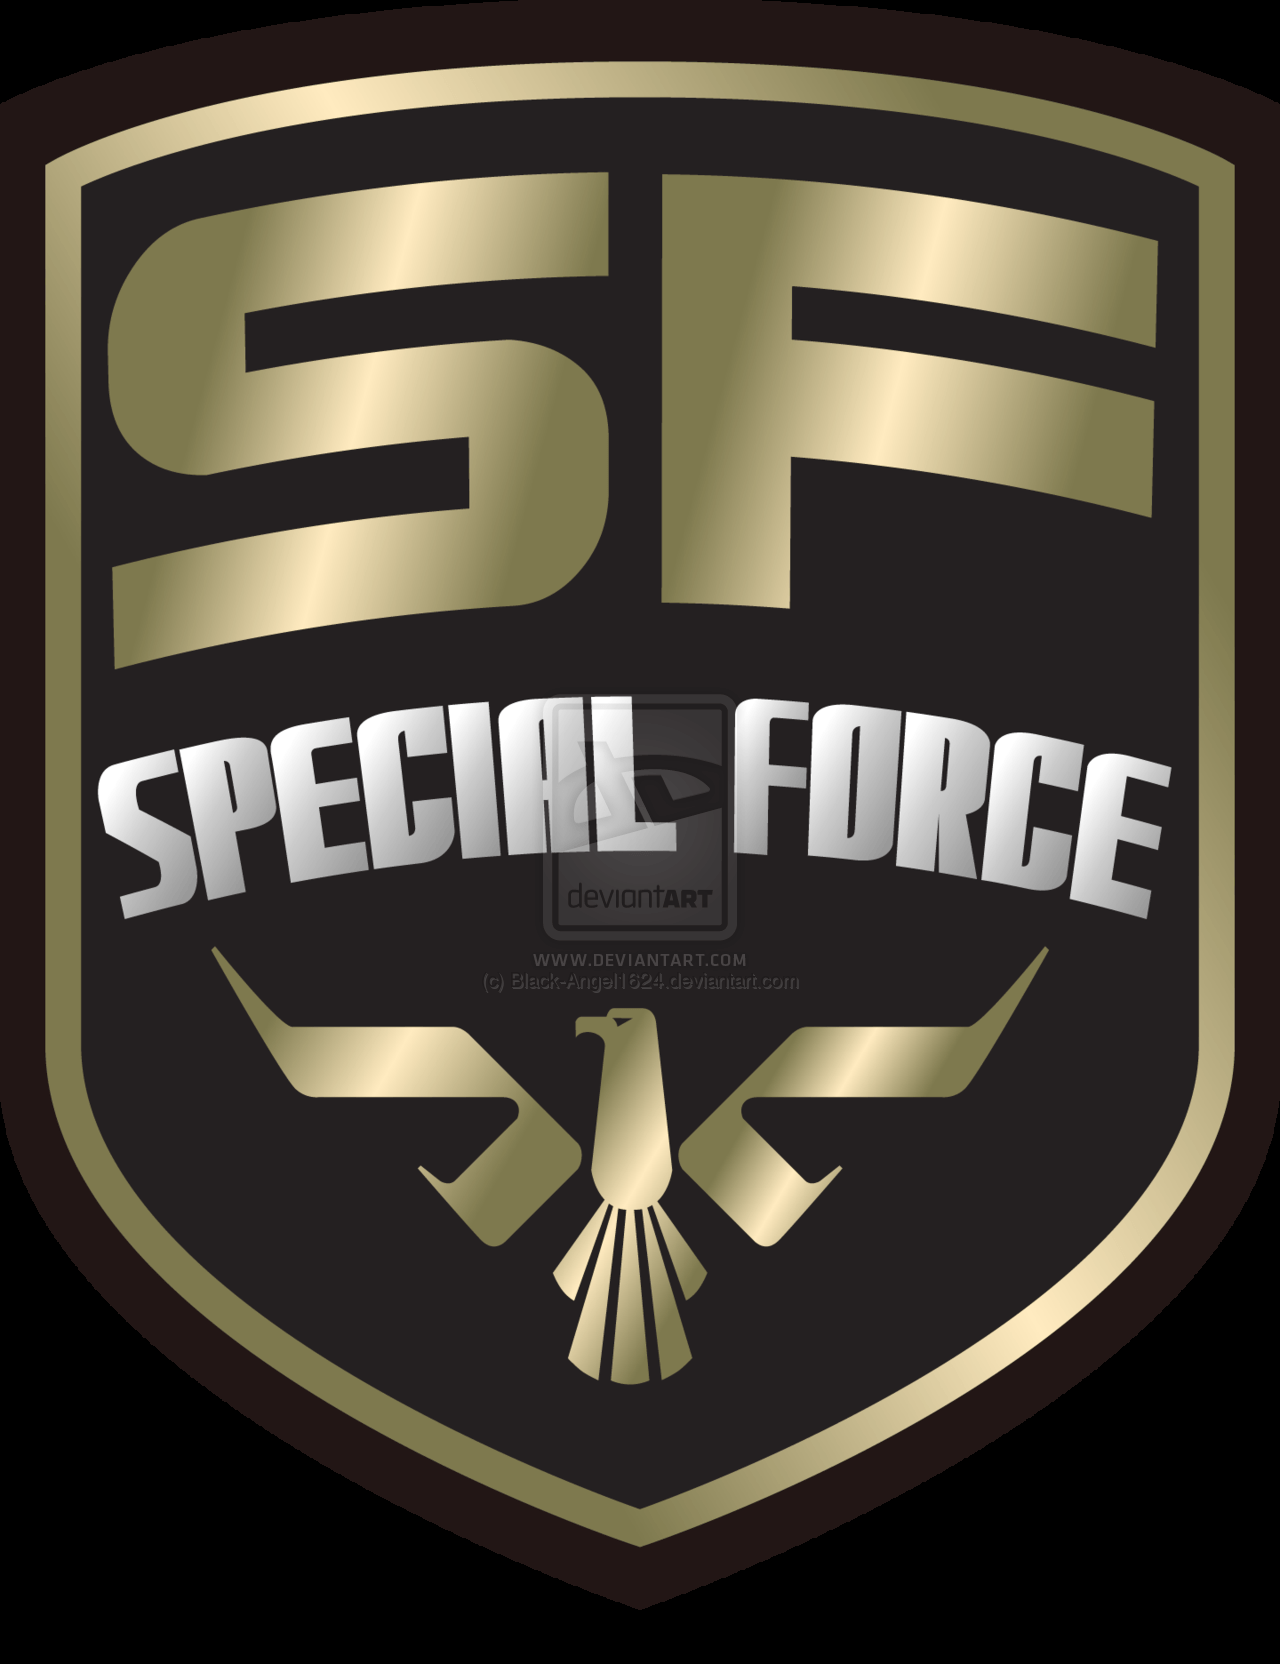  Special Forces  Logo Wallpapers Wallpaper Cave